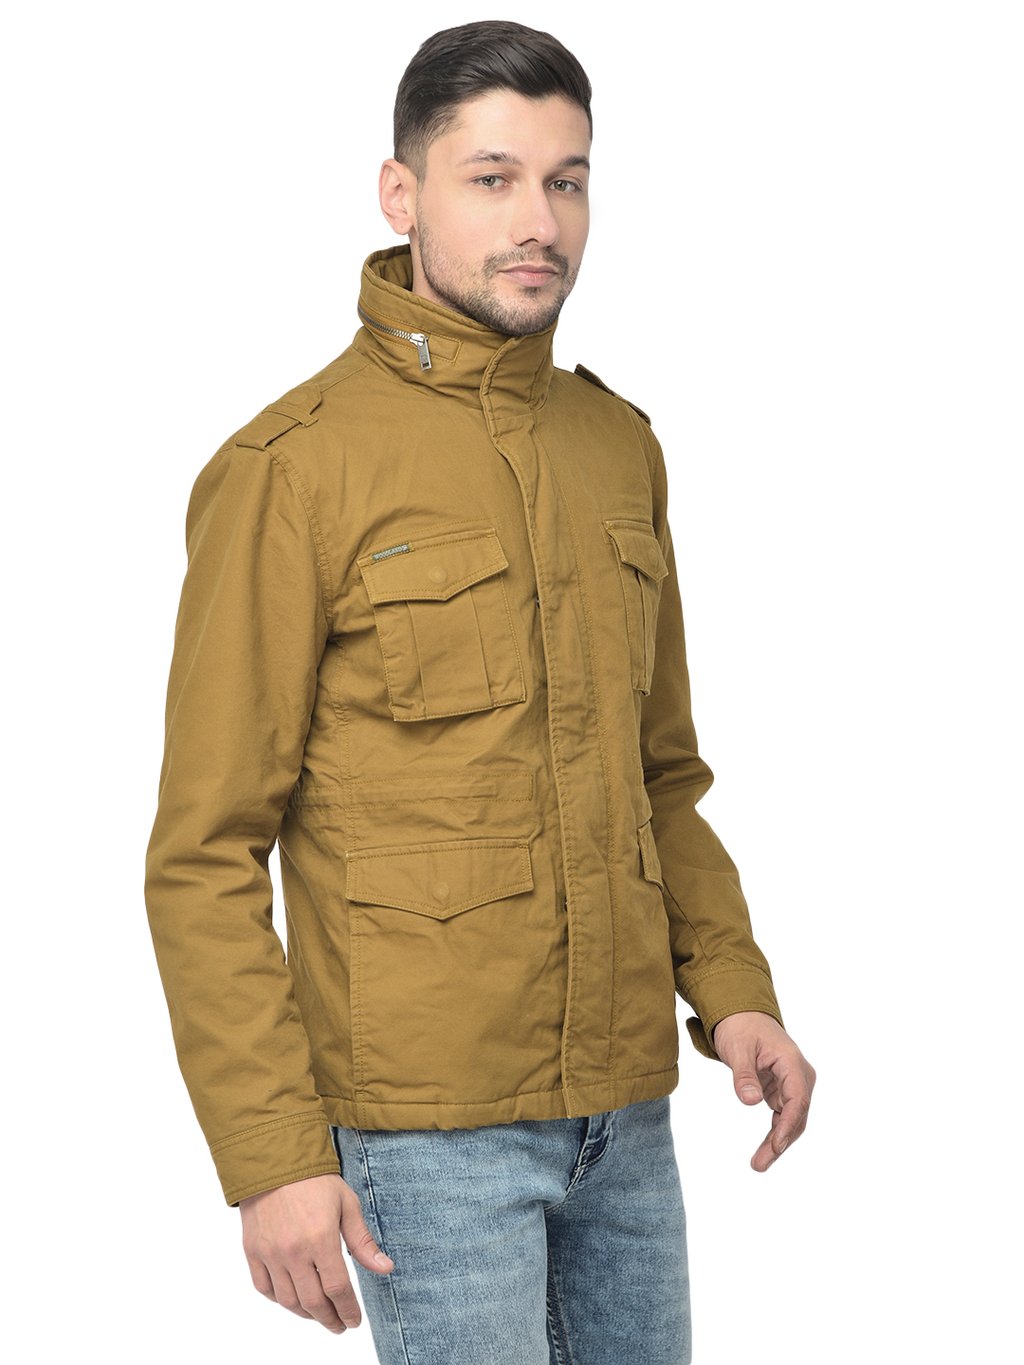 Small , Medium Party Wear Men's Brown Leather Jacket at Rs 4500 in Chennai